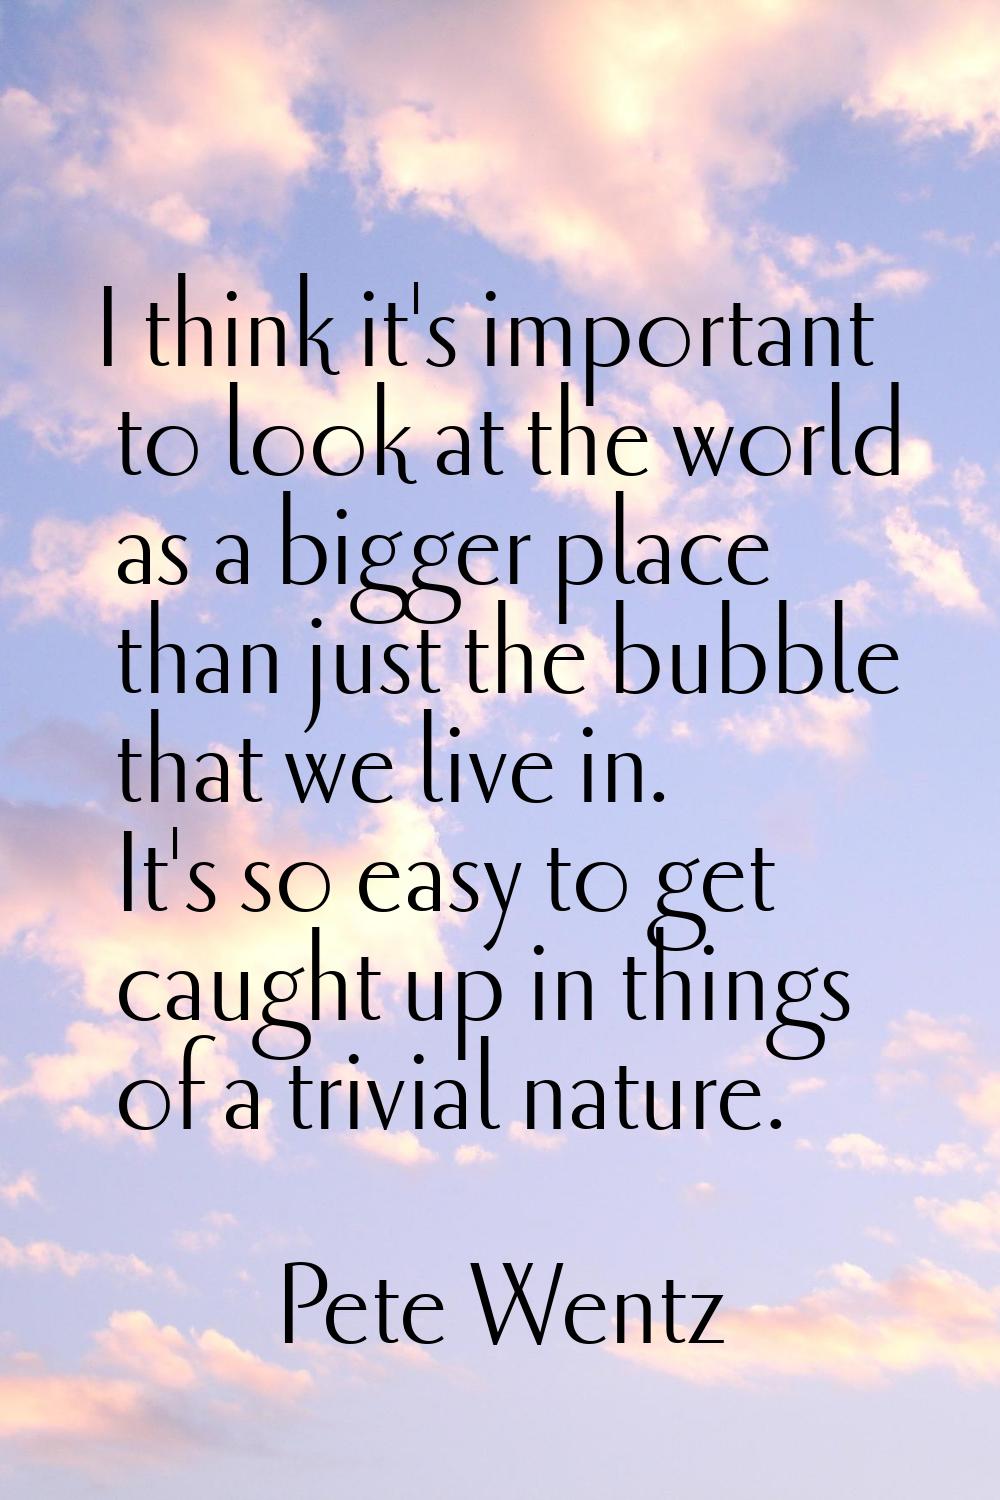 I think it's important to look at the world as a bigger place than just the bubble that we live in.